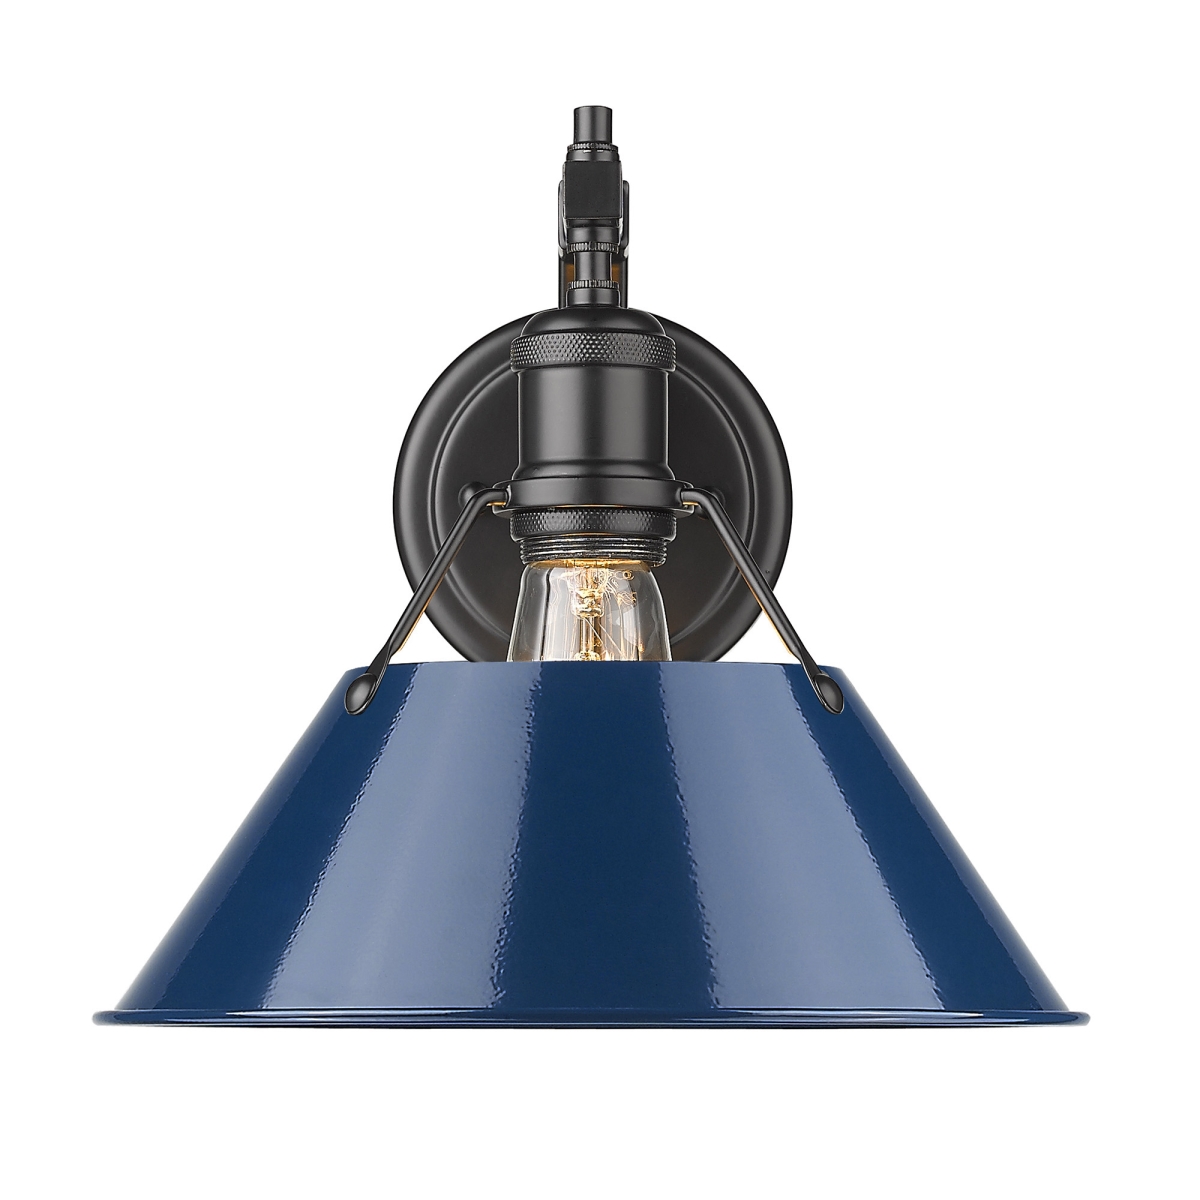 3306-1w Blk-nvy Orwell 1 Light Wall Sconce In Black With Navy Blue Shade